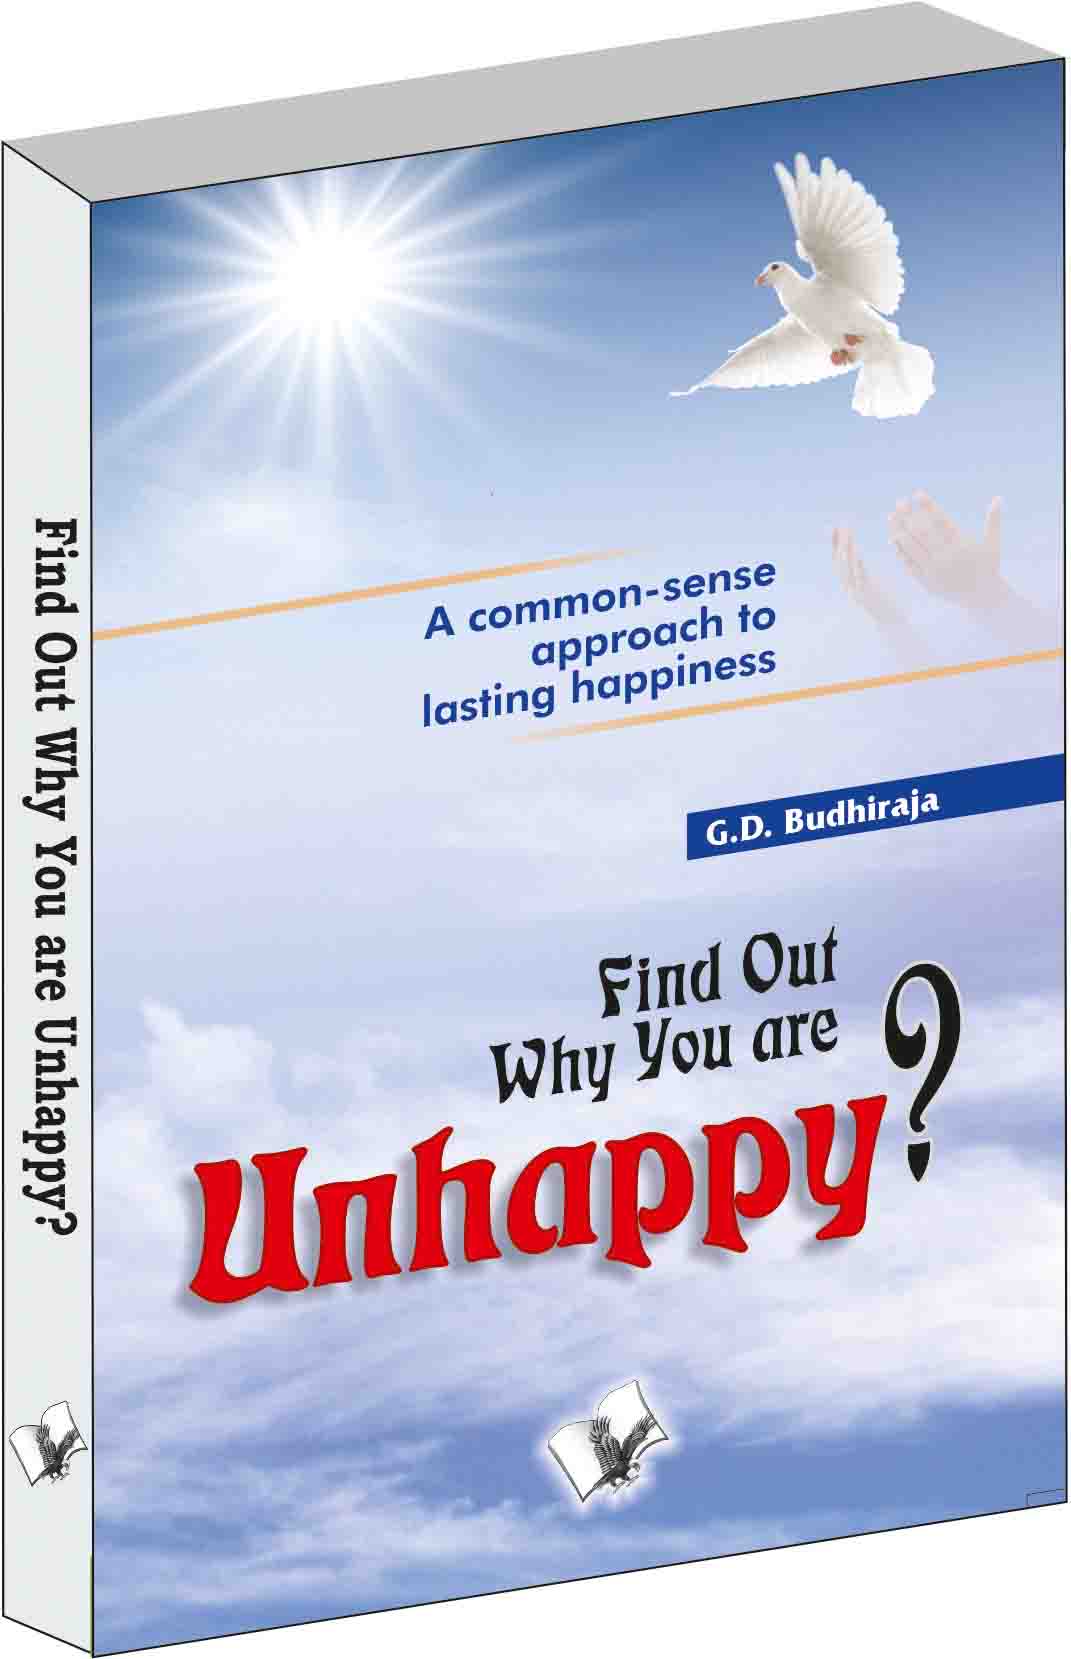 Find Out Why You Are Unhappy-Start Living and enjoy life